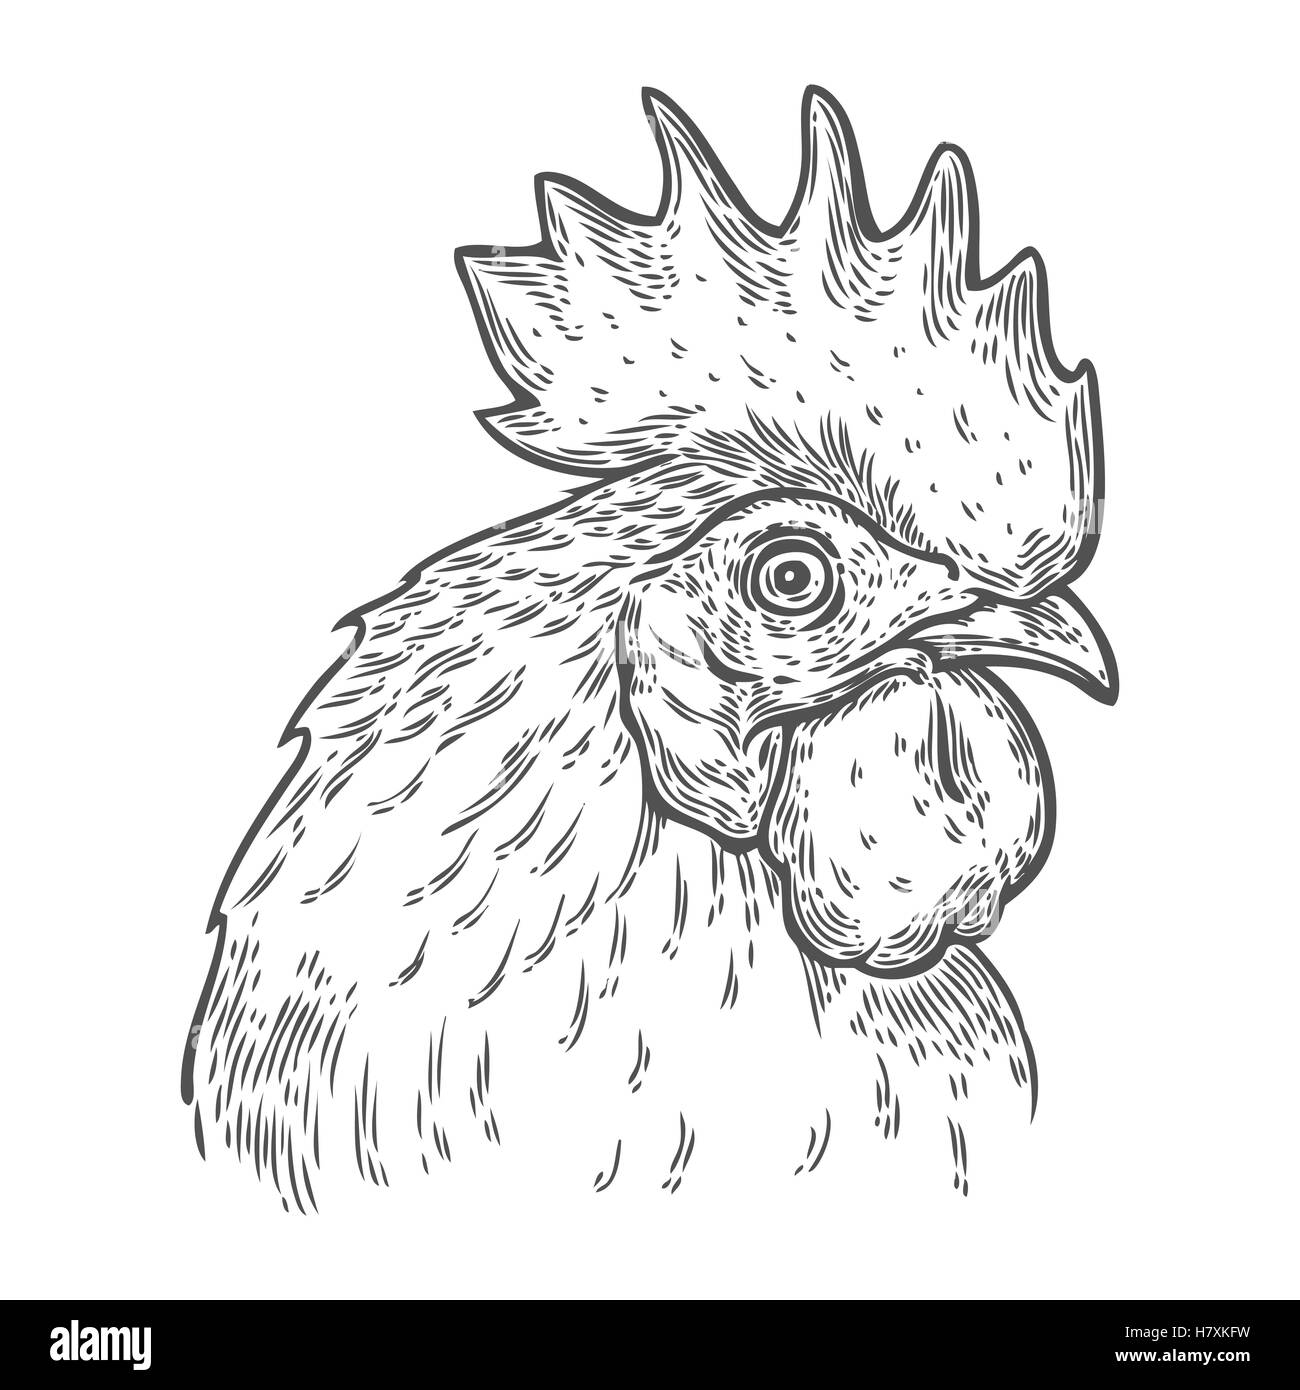 Chicken Head Outline Vector Images over 850